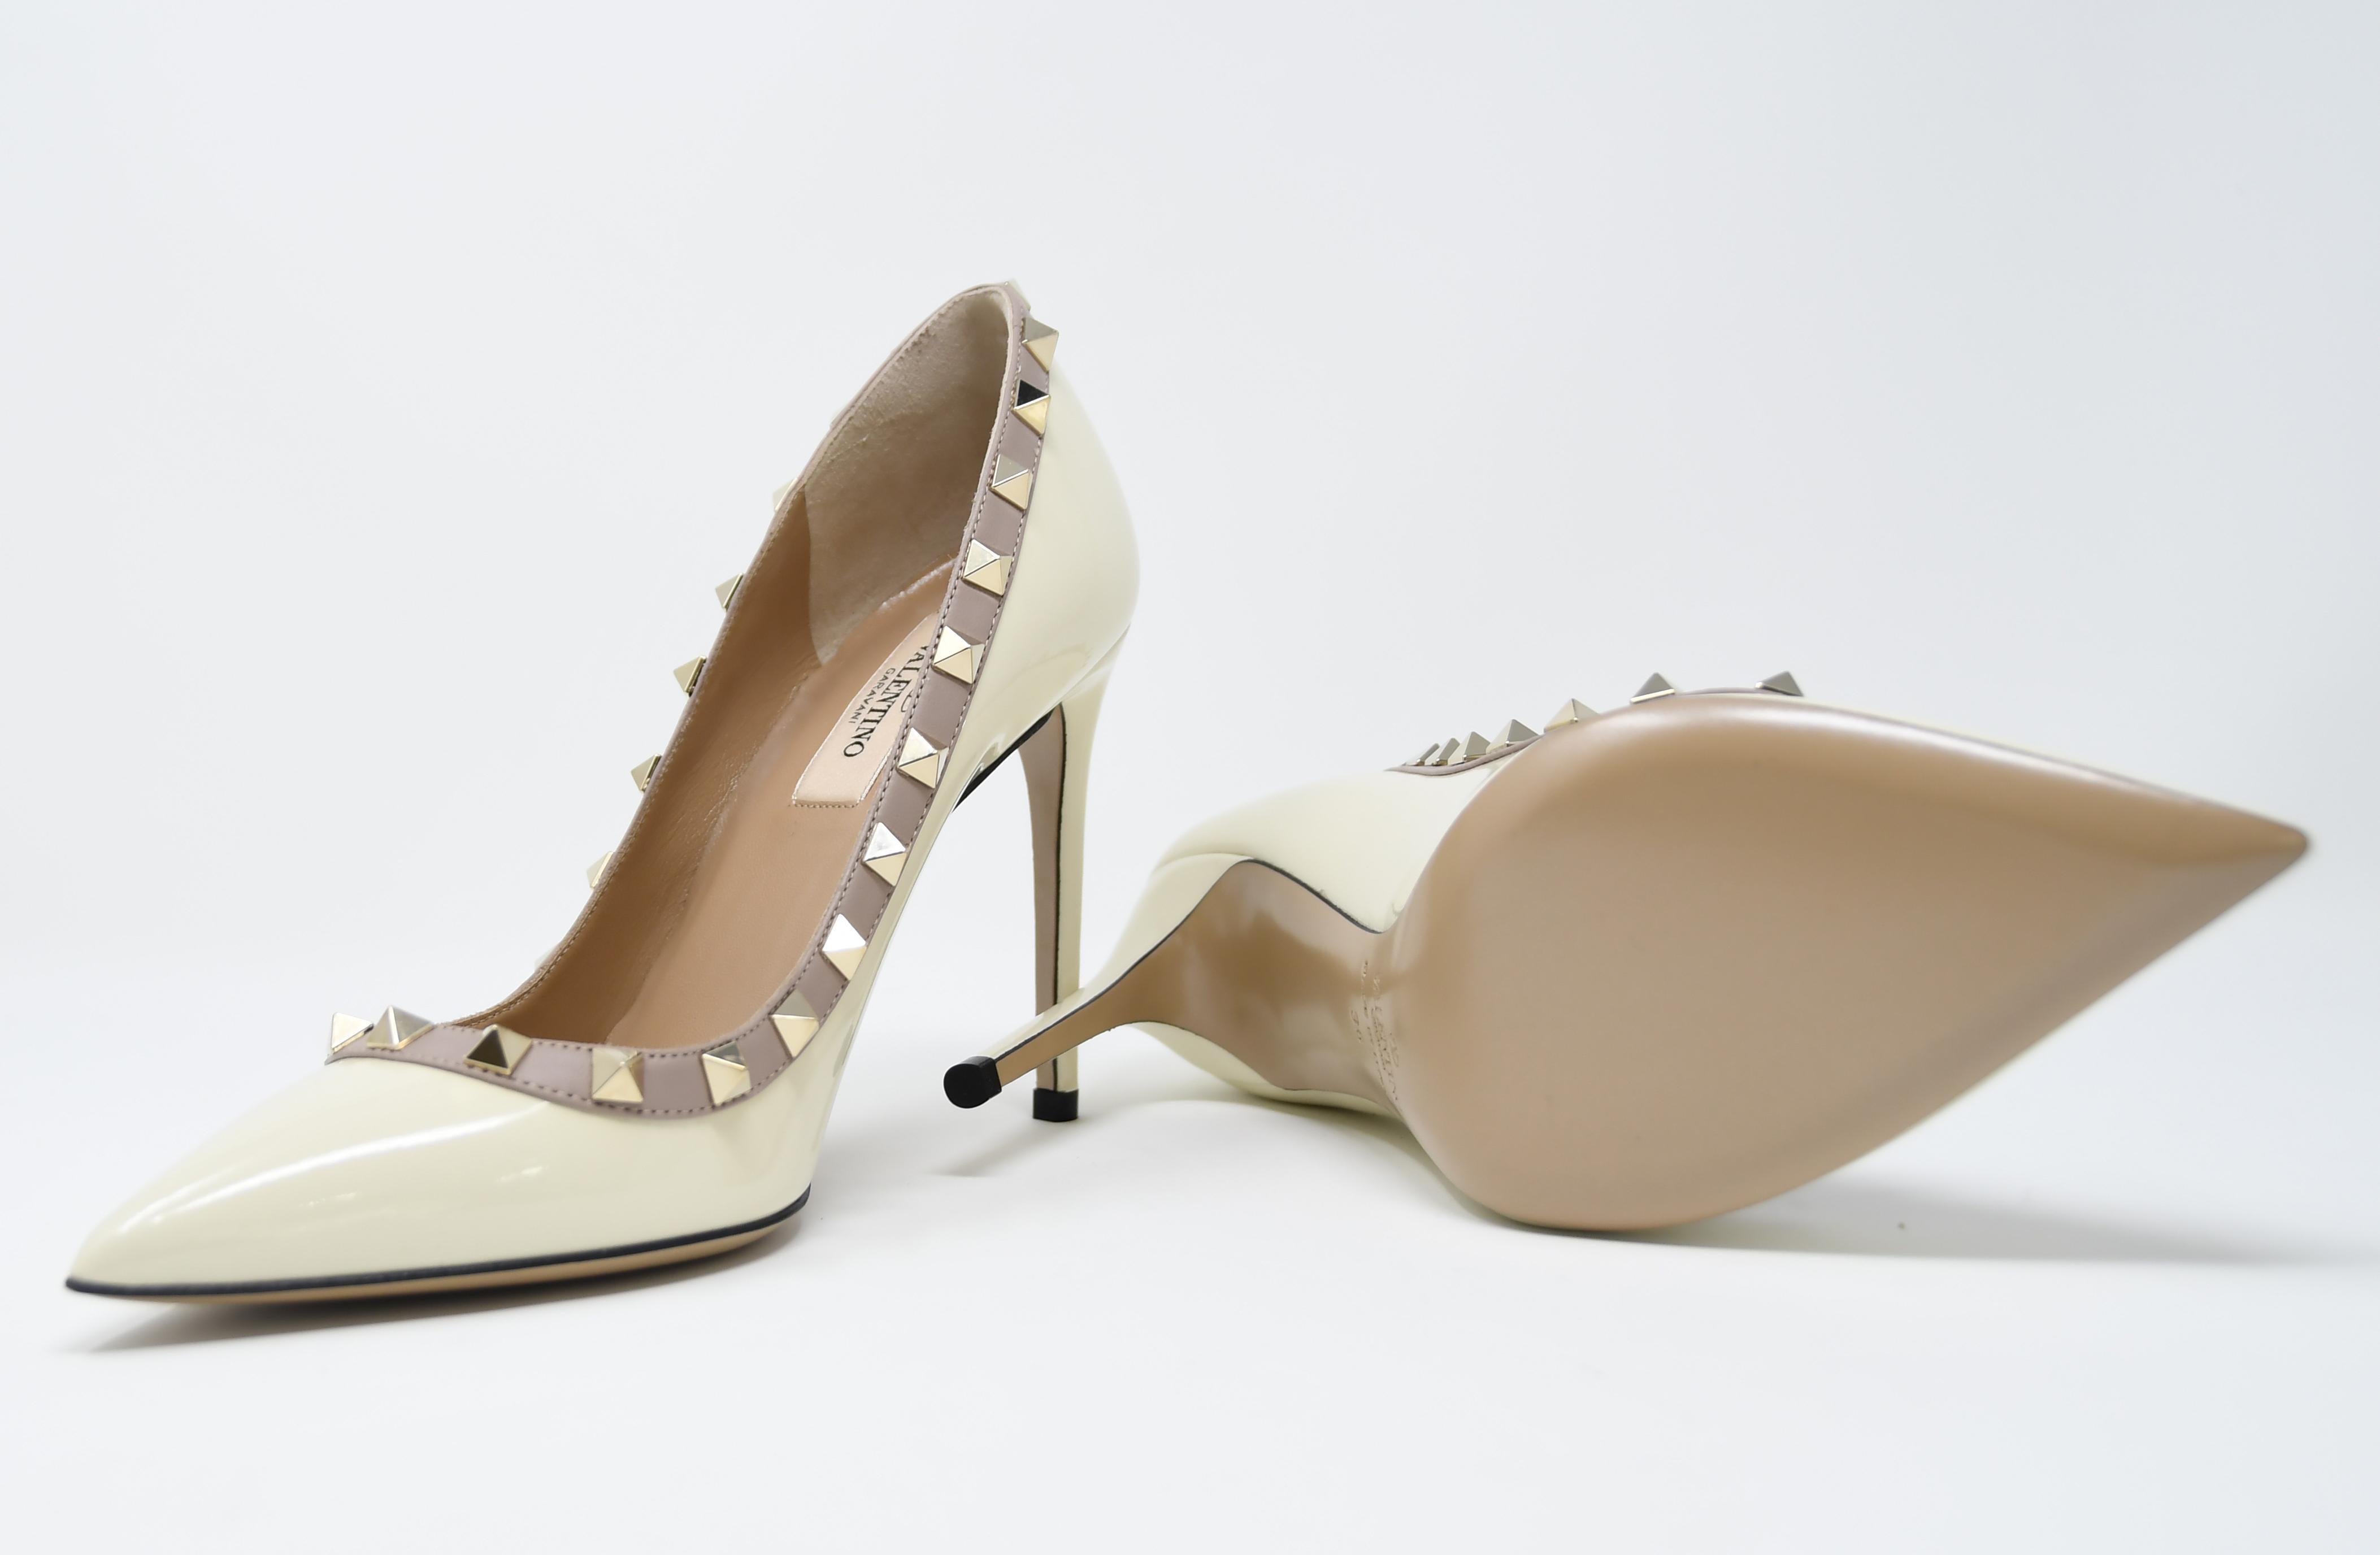 Classic Valentino stiletto in an off white patent leather with signature gold rock stud design.  Brand new and comes in original box with dust bag.